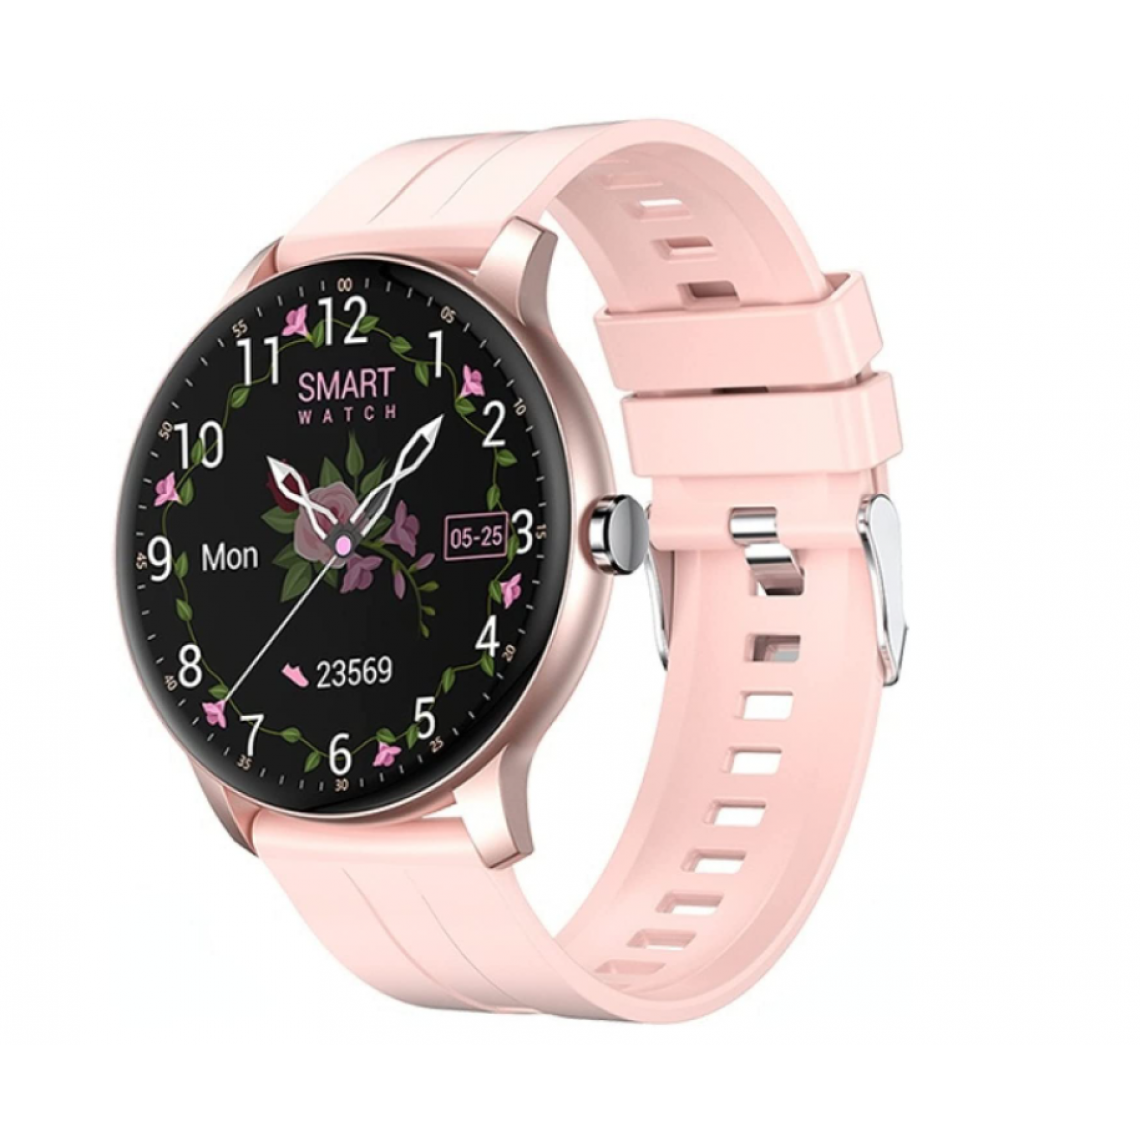 Chronotech Montres - Smart Watch with Bluetooth Calling, Heart Rate, Sleep Monitoring, Information Reminder, IP67 Waterproof for Men and Women (pink) - Montre connectée